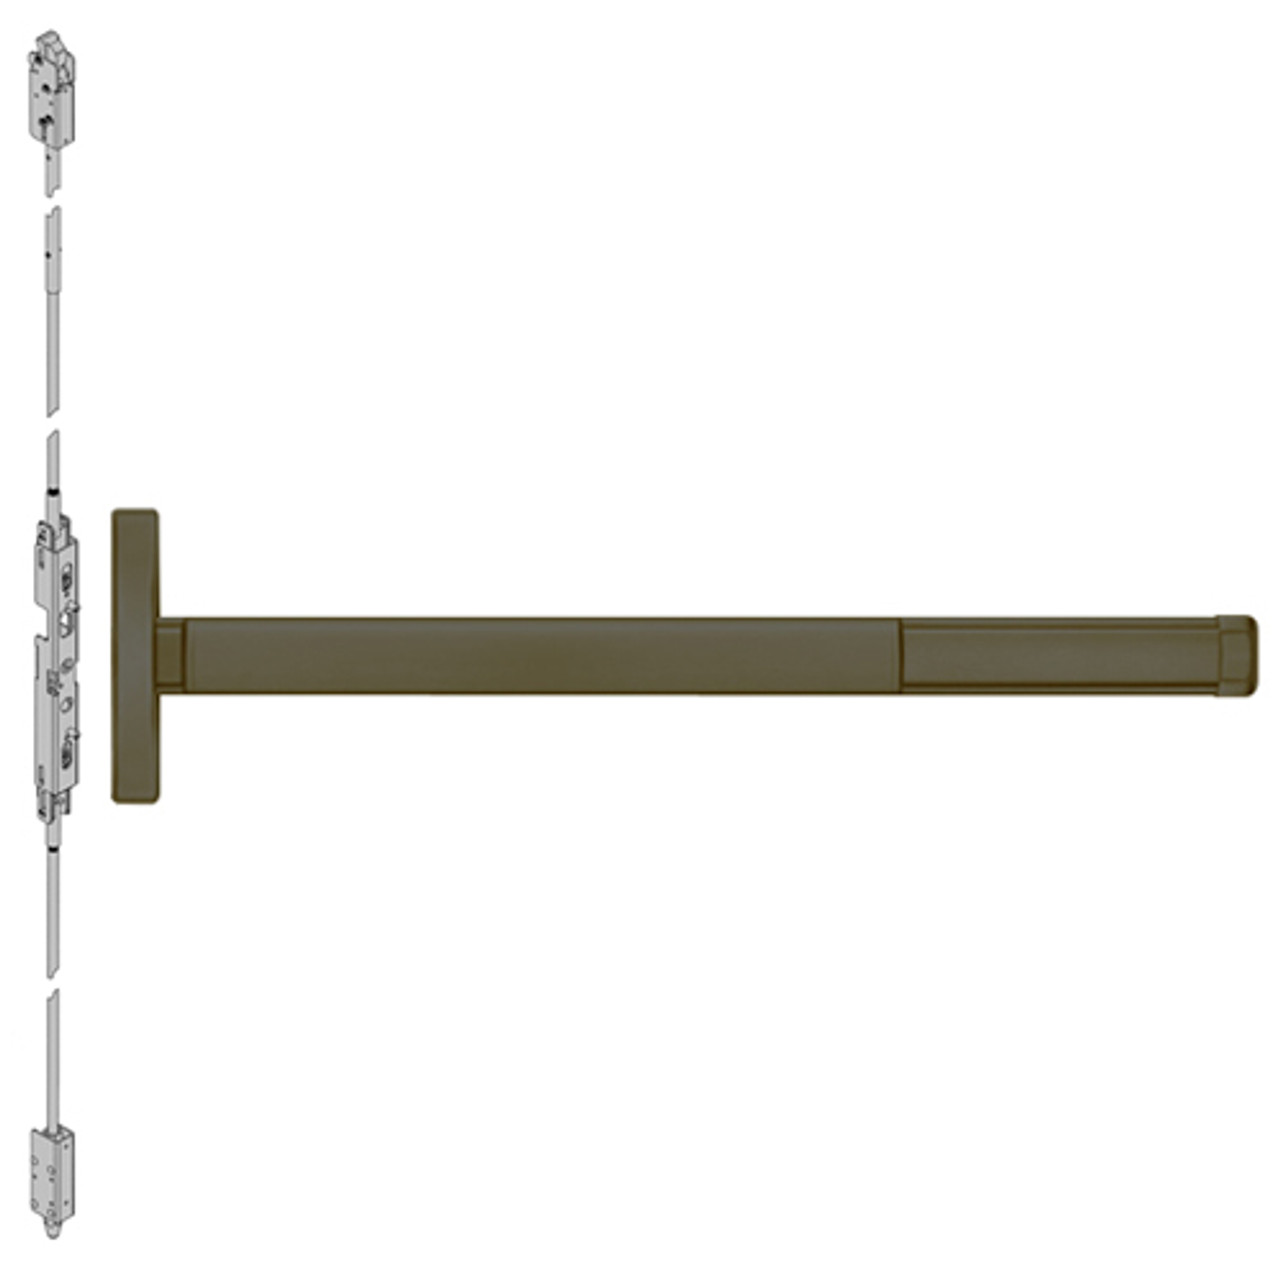 TSFL2603LBR-613-48 PHI 2600 Series Fire Rated Concealed Vertical Rod Exit Device with Touchbar Monitoring Switch Prepped for Key Retracts Latchbolt in Oil Rubbed Bronze Finish